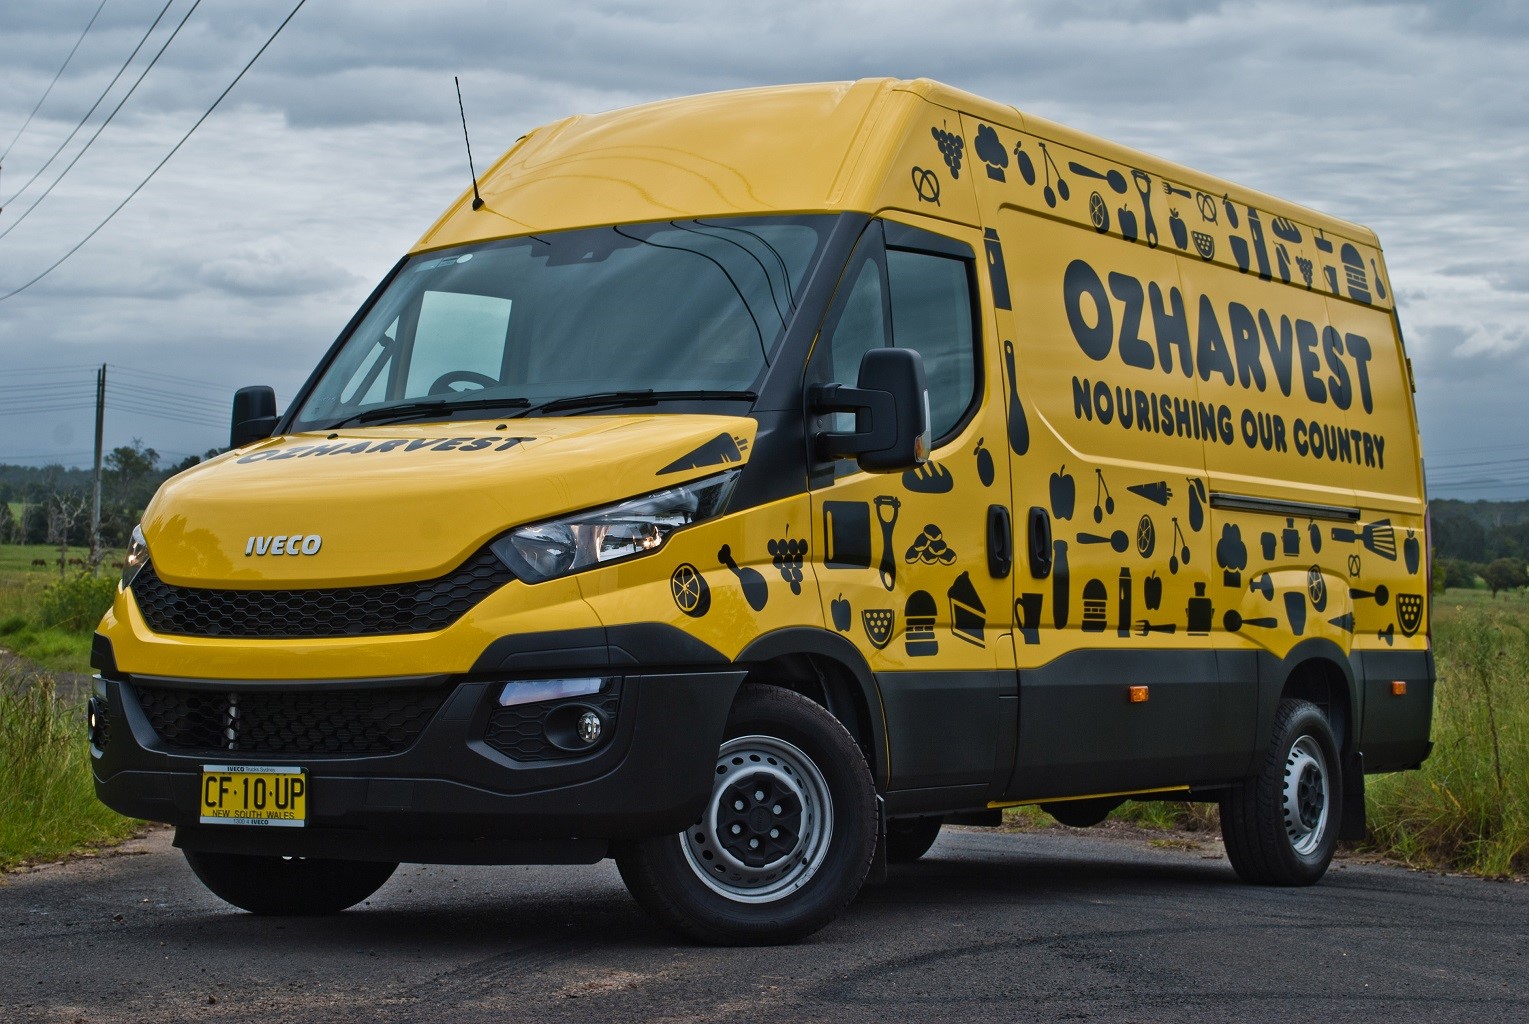 CNH Industrial brand IVECO is a strong supporter of OzHarvest and of its work aimed at striving to eliminate food waste